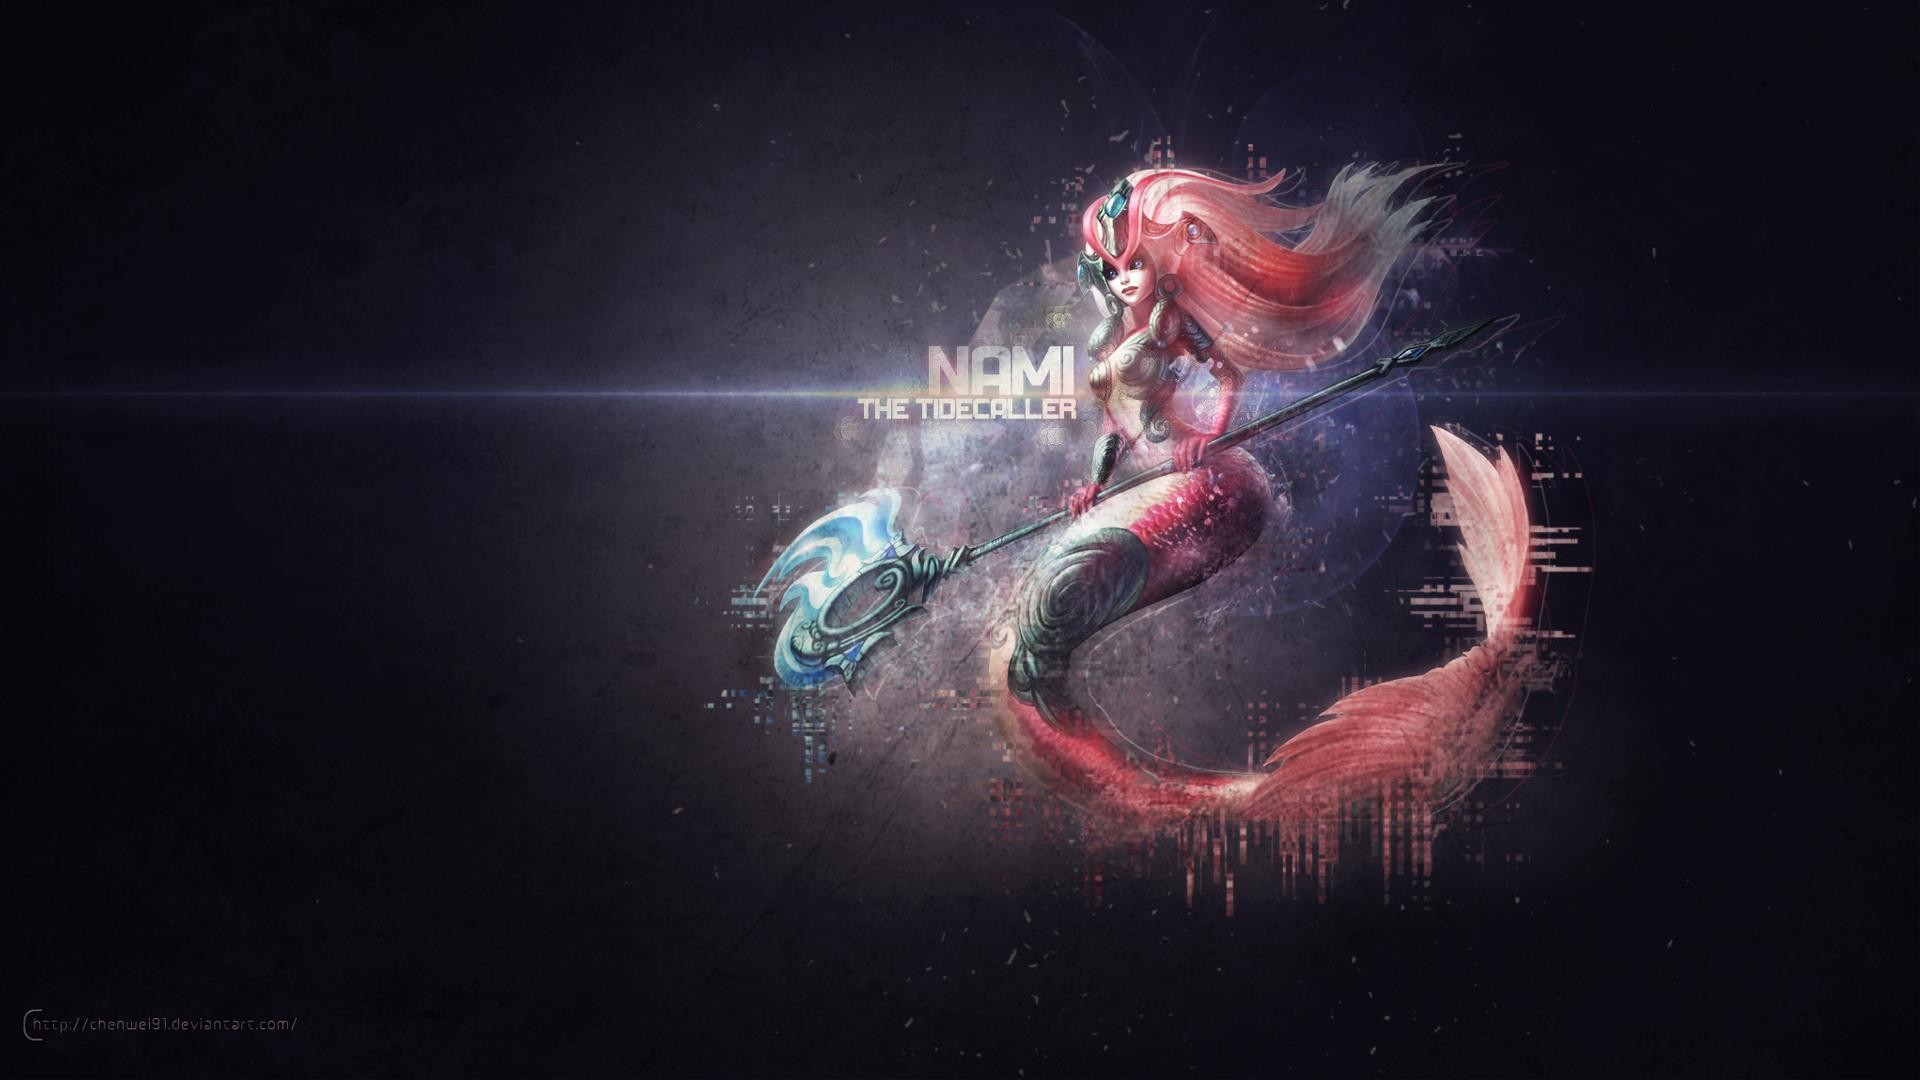 Nami league of legends s for desktop download free nami league of legends pictures and backgrounds for pc